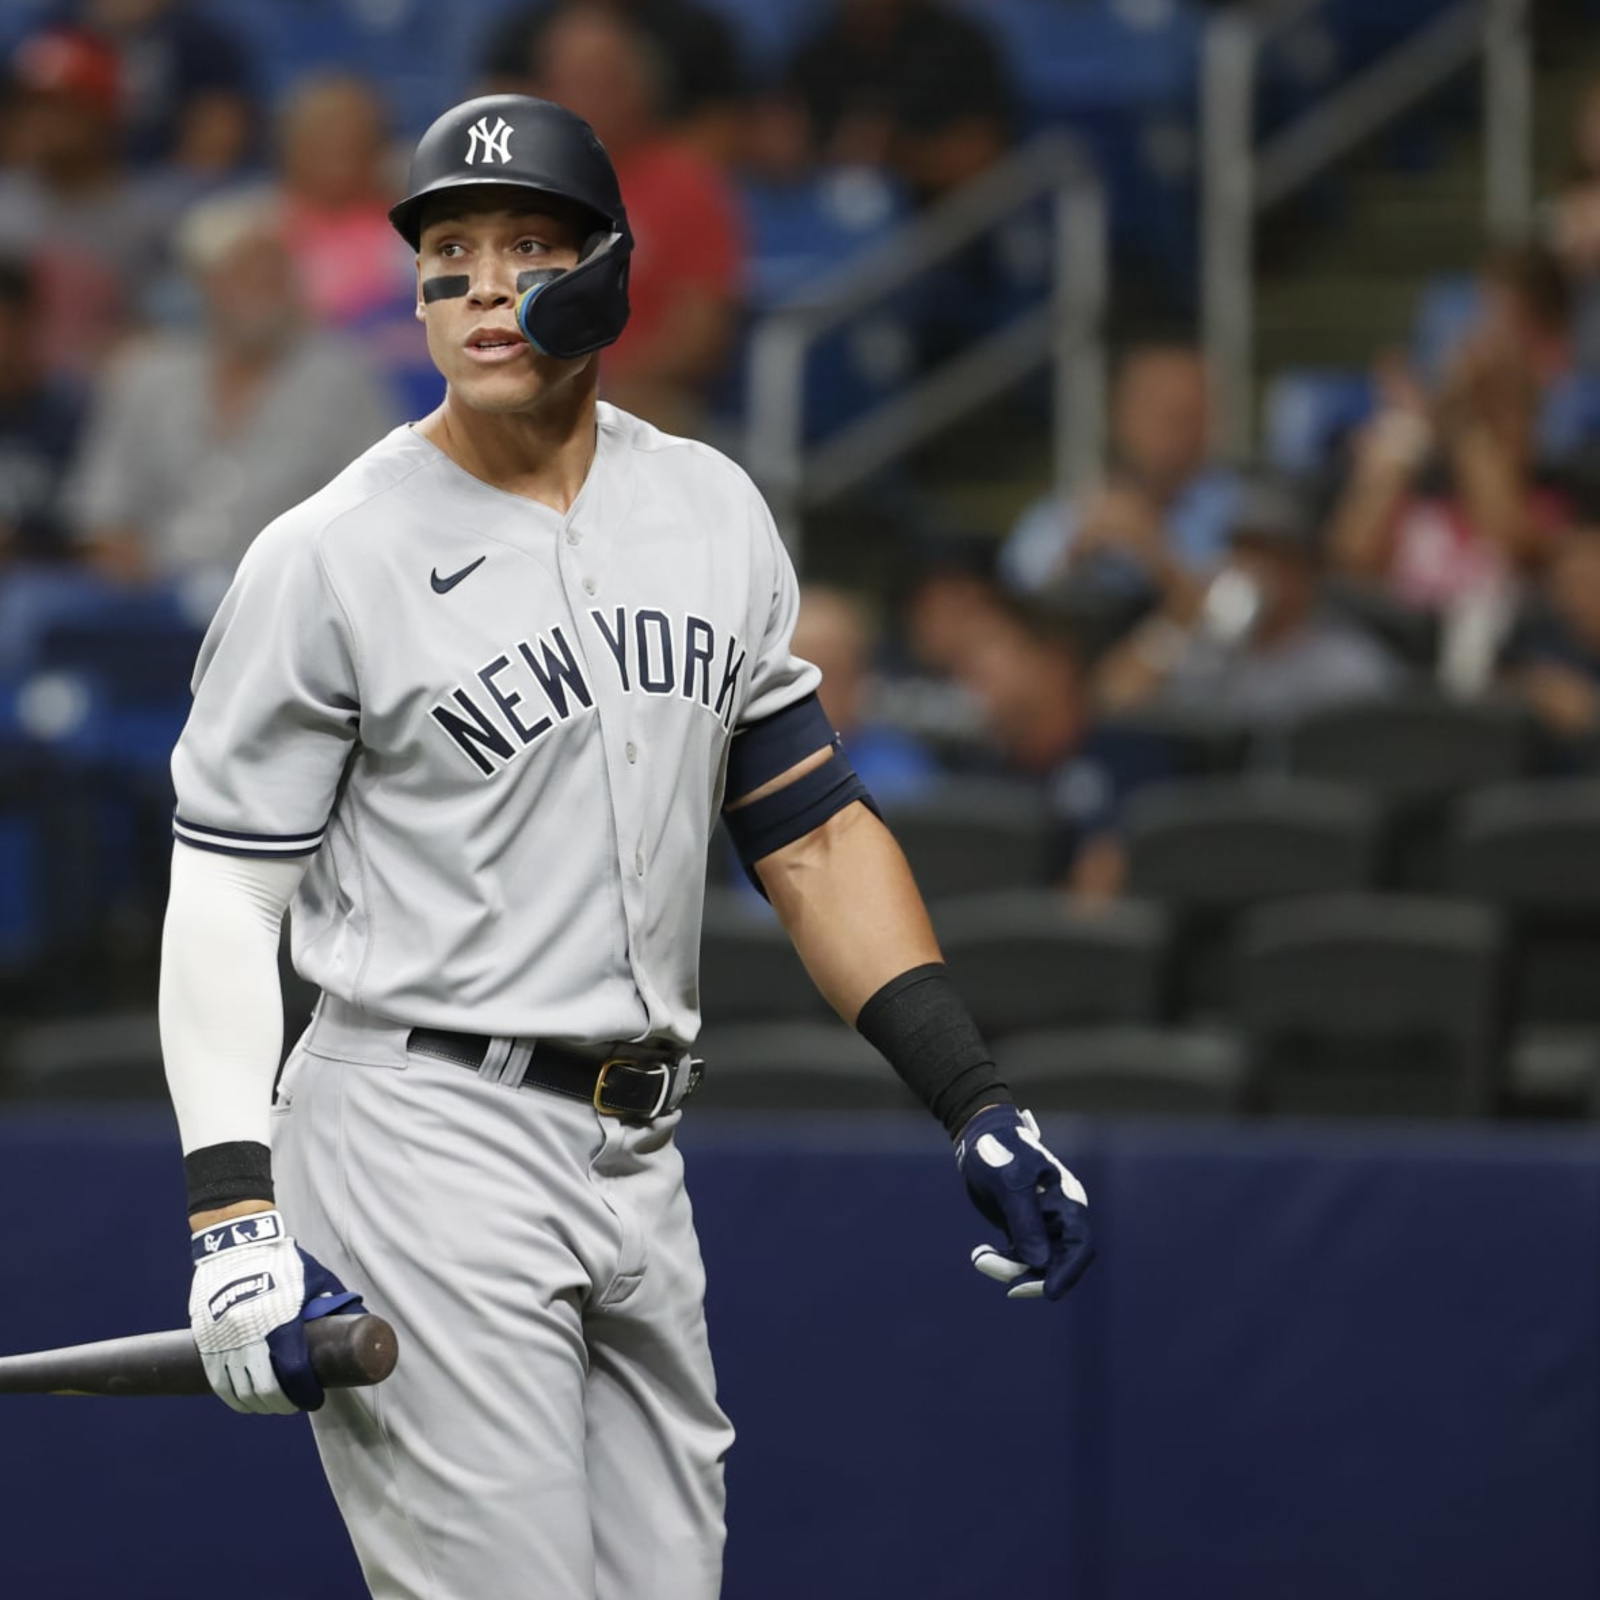 Yankees' Aaron Judge Crushes 53rd HR of 2022, Sets New Single